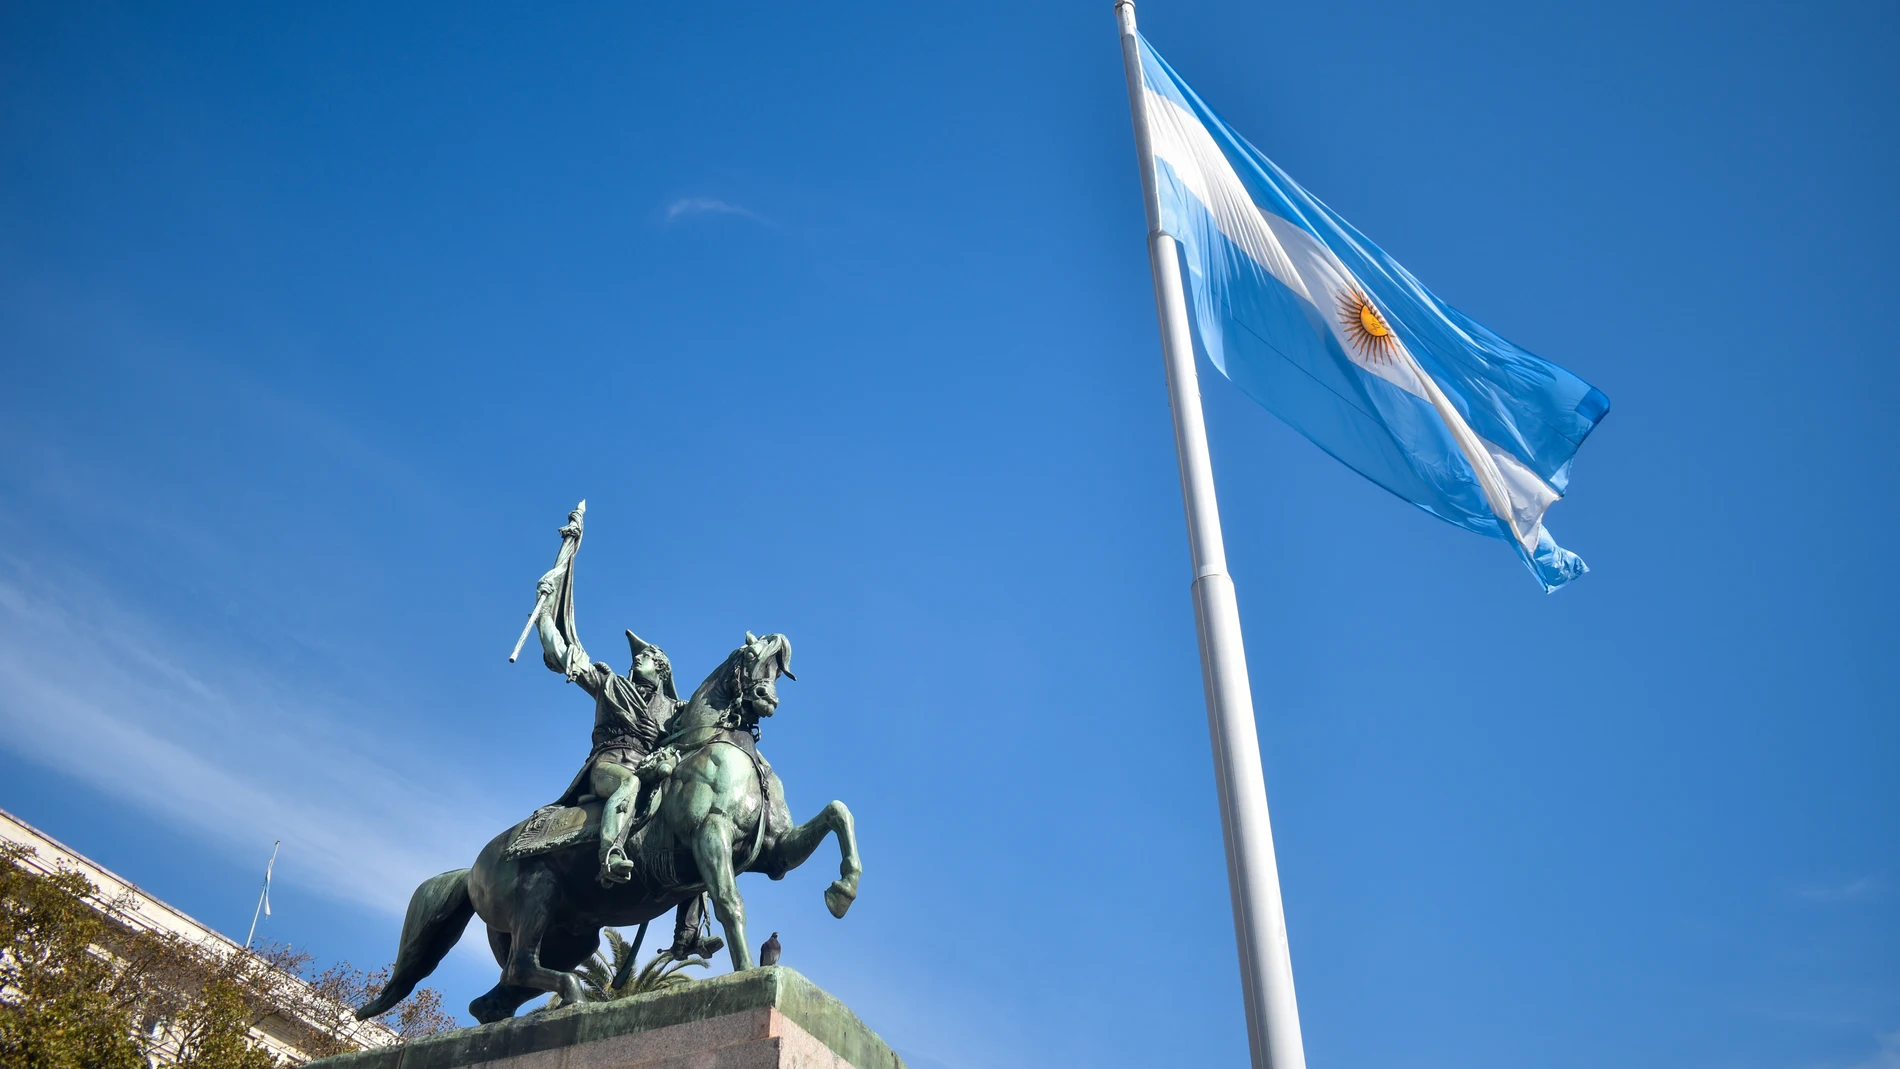 May 20, 2023, Buenos Aires, Ciudad Autonoma de Buenos Aires, Argentina: The flag of Argentina waves over the statue of General Manuel Belgrano on May 20 2023 in Buenos Aires, Argenitna. (Foto de ARCHIVO) 20/05/2023